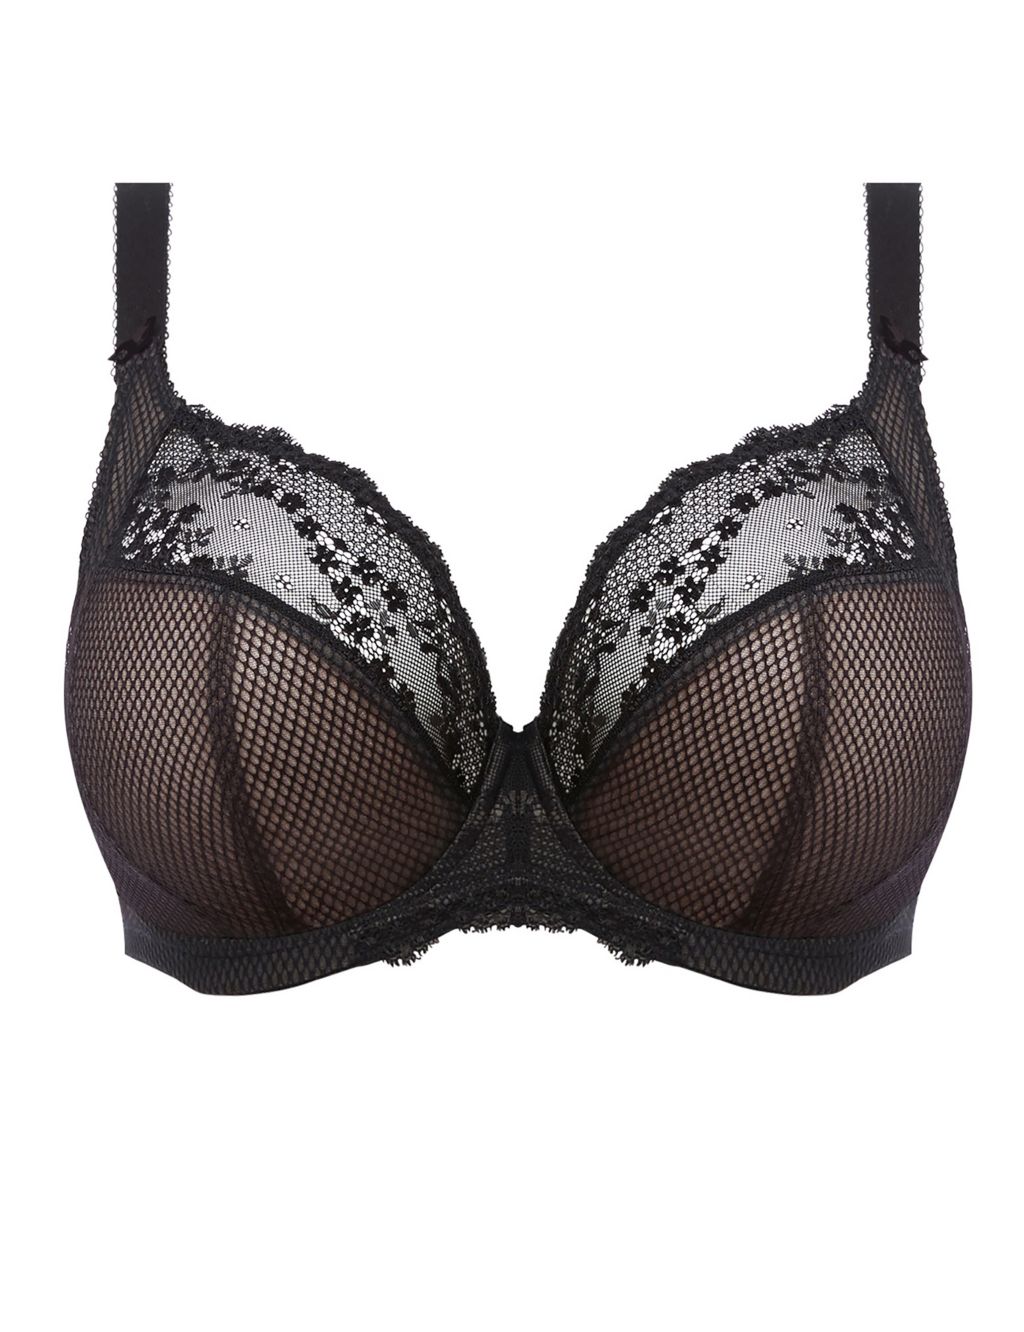 Charley Lace & Mesh Wired Plunge Bra DD-J image 2